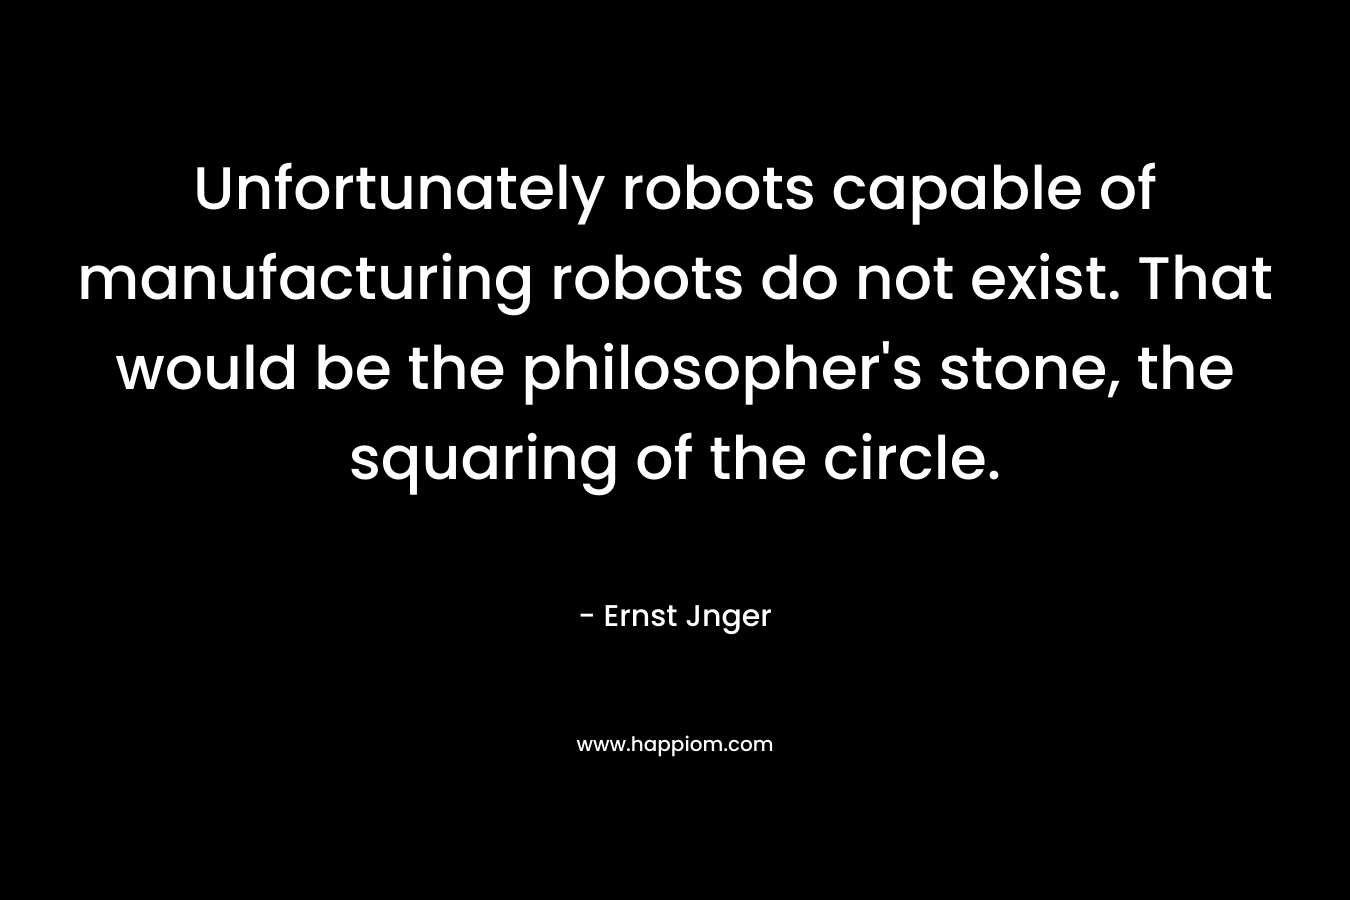 Unfortunately robots capable of manufacturing robots do not exist. That would be the philosopher’s stone, the squaring of the circle. – Ernst Jnger